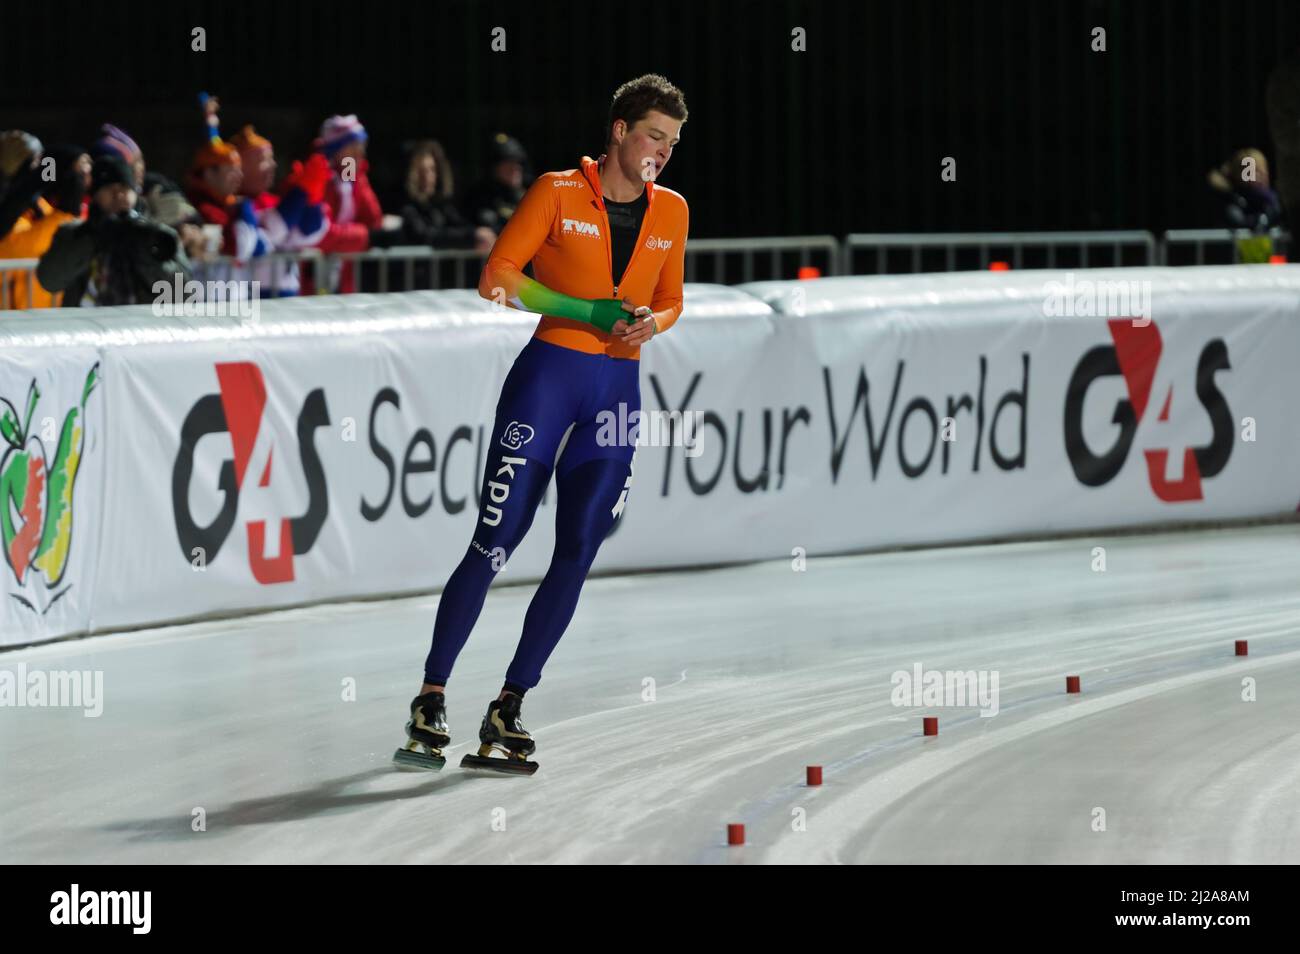 Sven Kramer competing for The Netherlands at the 2012 Essent European Speed Skating Championships, City Park Ice Rink, Budapest, Hungary Stock Photo